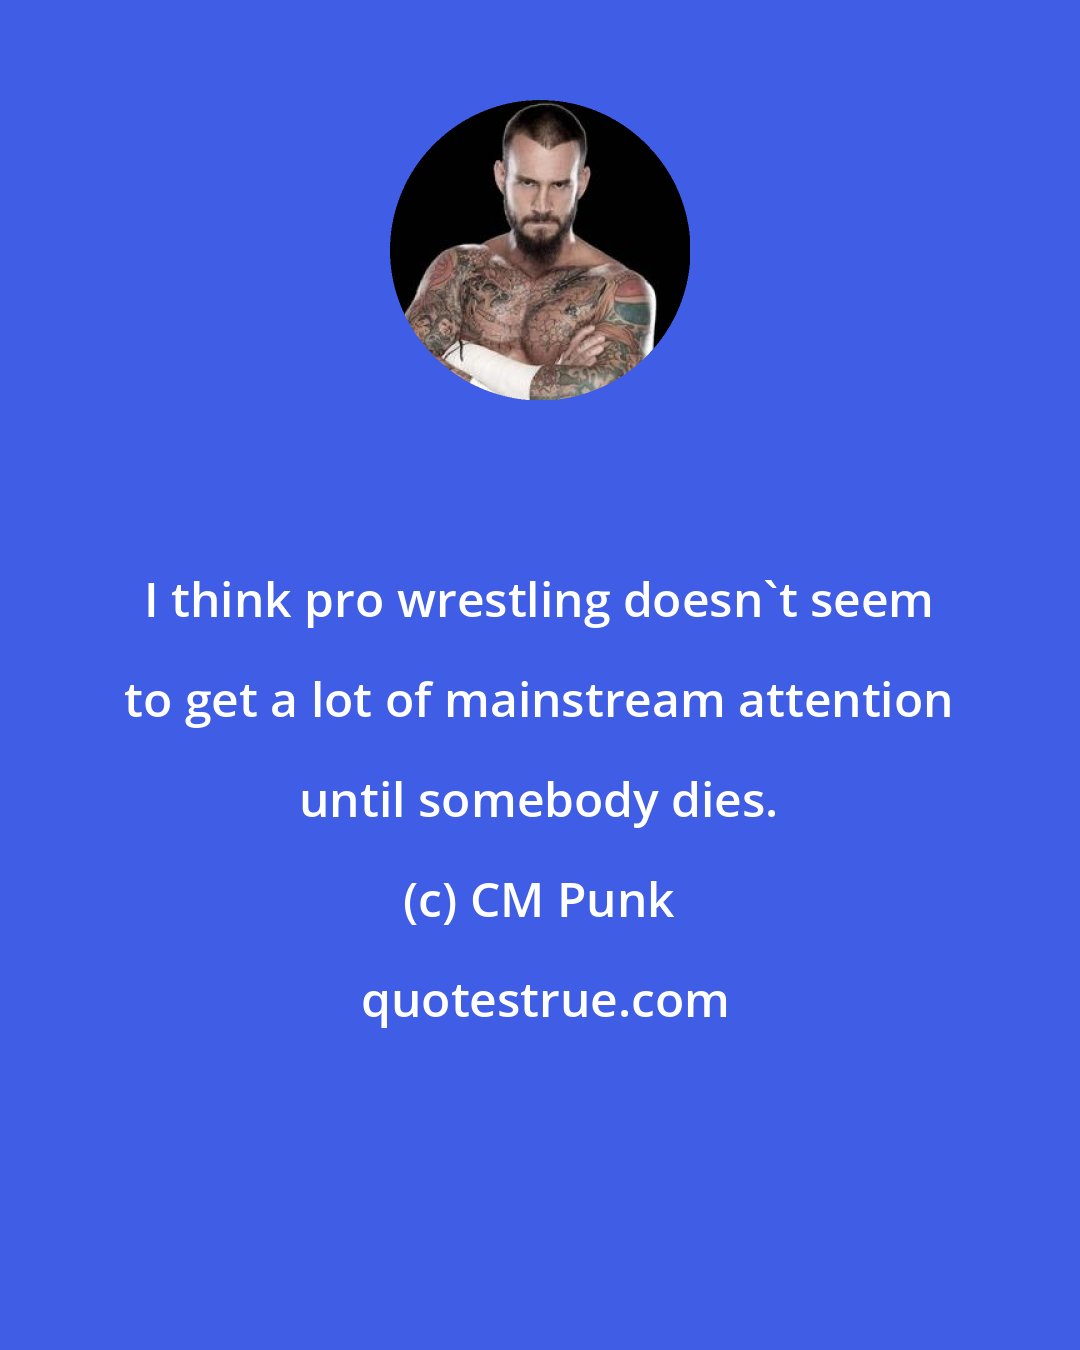 CM Punk: I think pro wrestling doesn't seem to get a lot of mainstream attention until somebody dies.